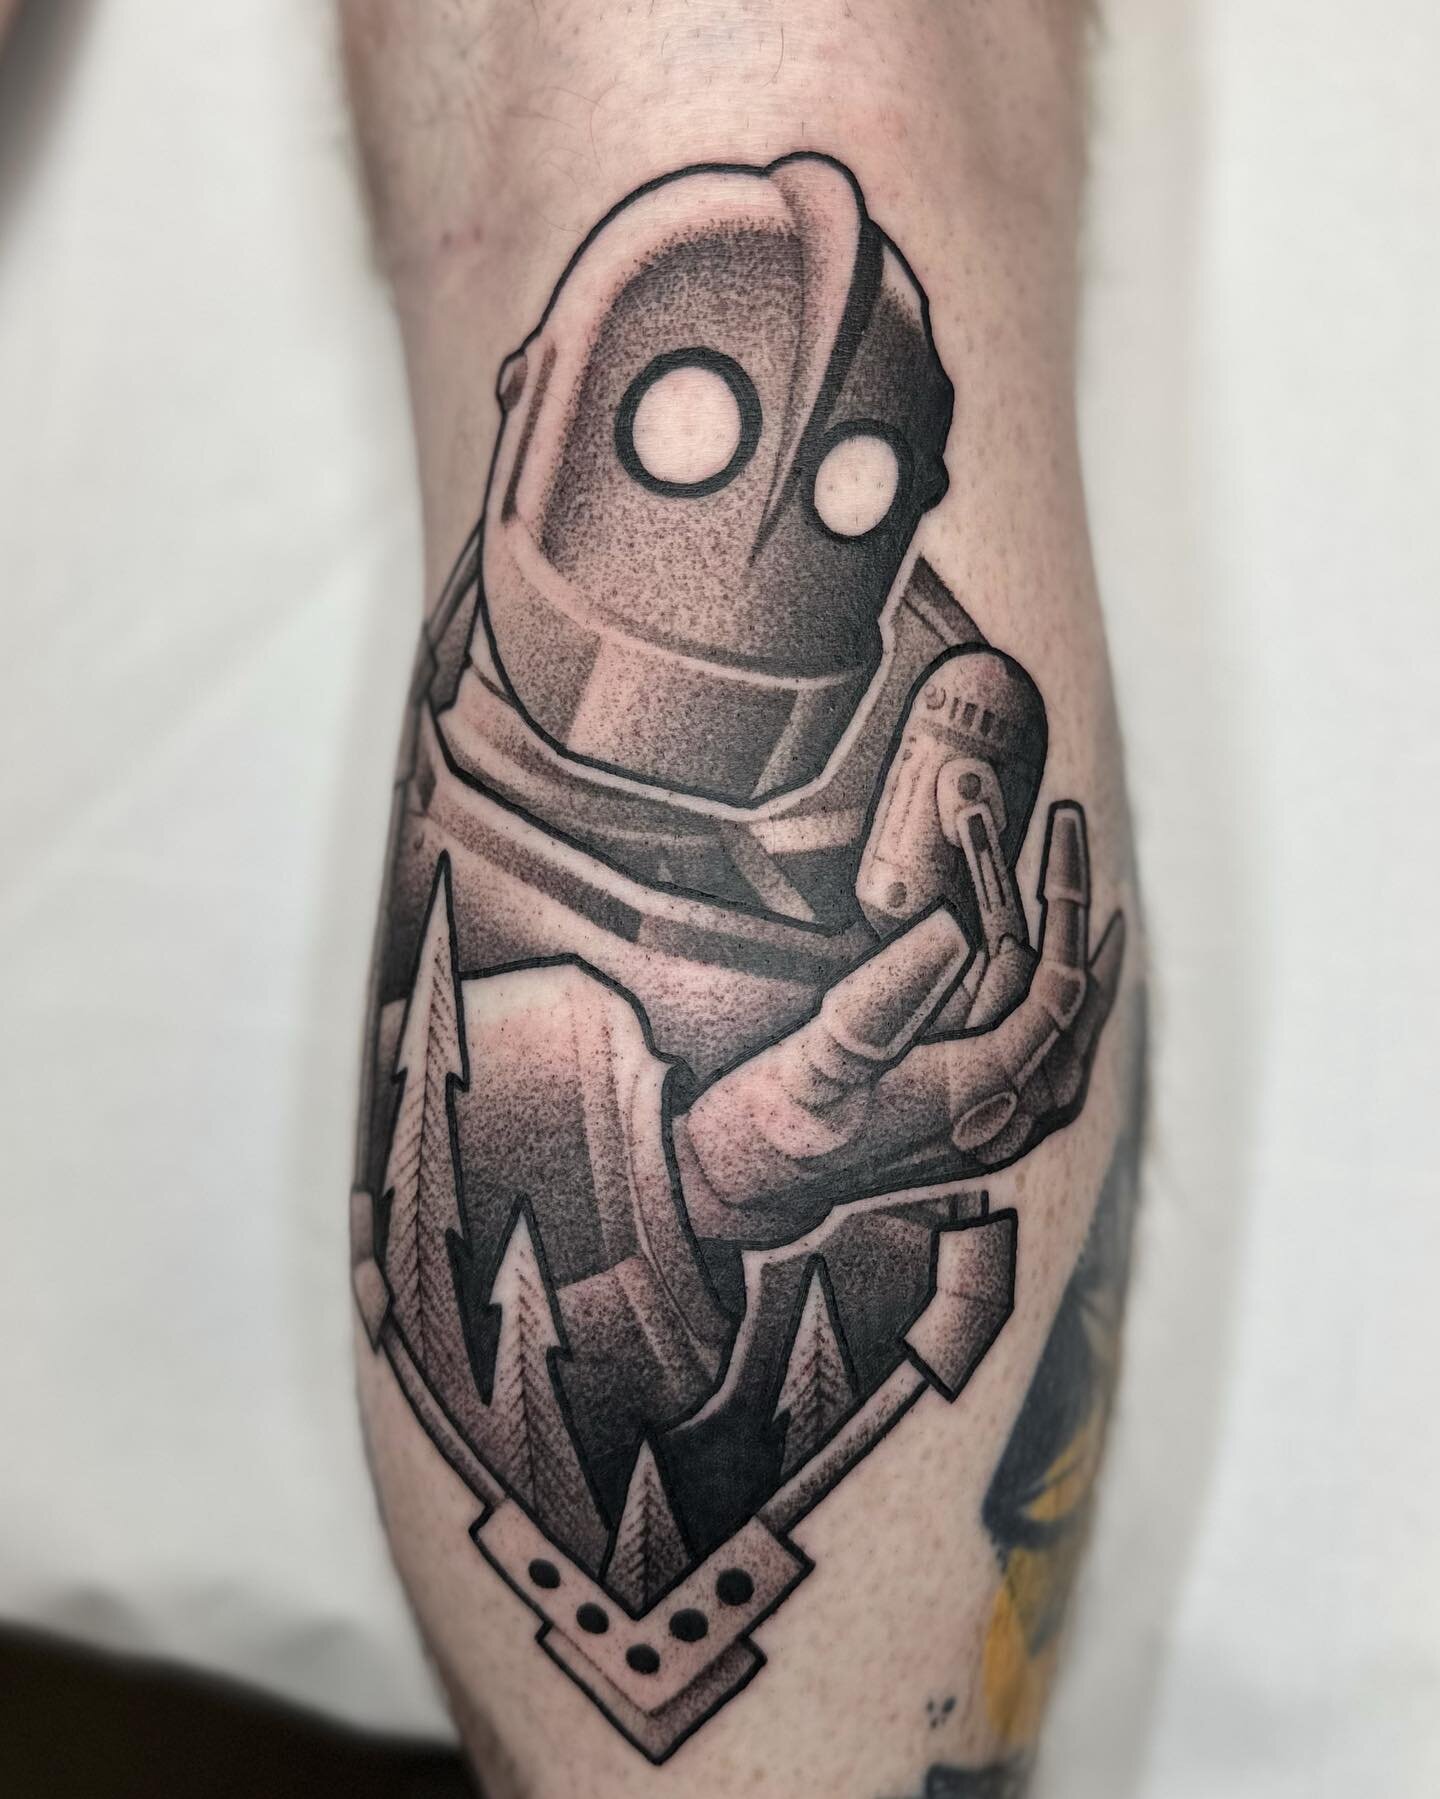 Made these 2 dudes for Rob today, thanks again man! 
.
.
.
.
.
#irongiant #irongianttattoo #tattoos #starwars #r2d2tattoo #blackworktattoo #dotworktattoo #artwork #tattooed #manchestertattoo